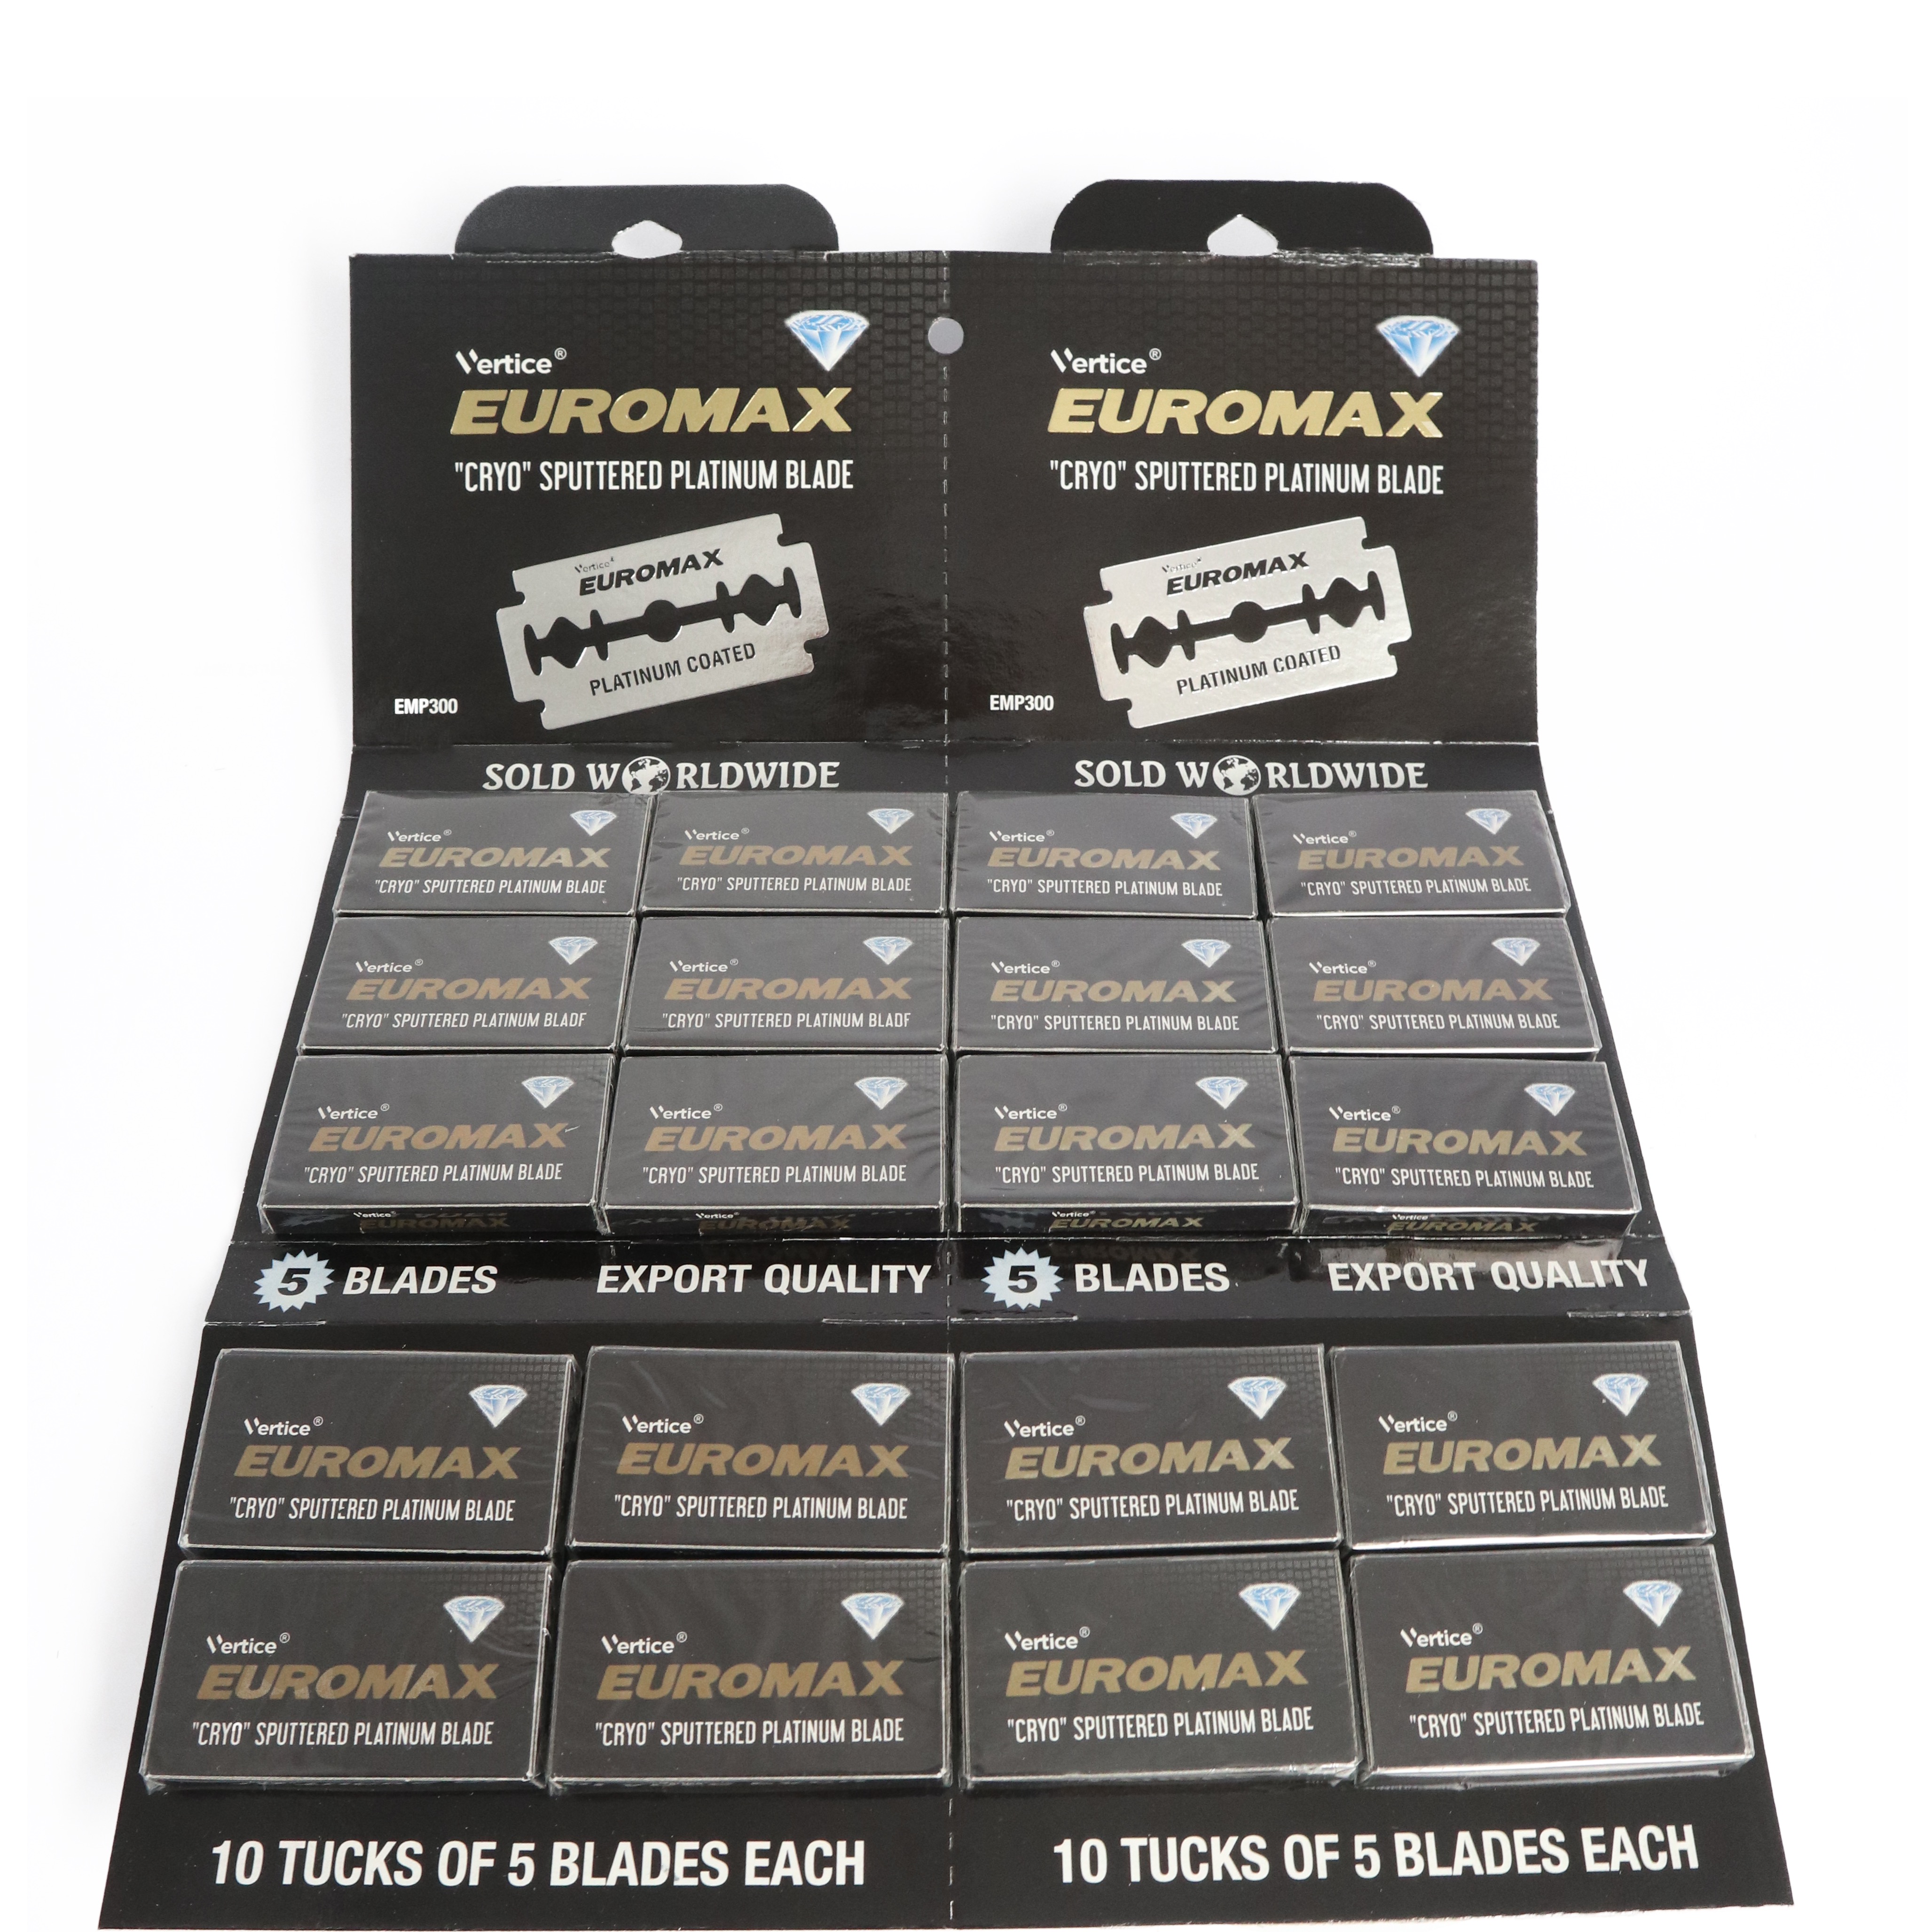 1 Verpakking Euromax Double edge blades - 1.1 - 1PACK-EUROMAX-CRYO